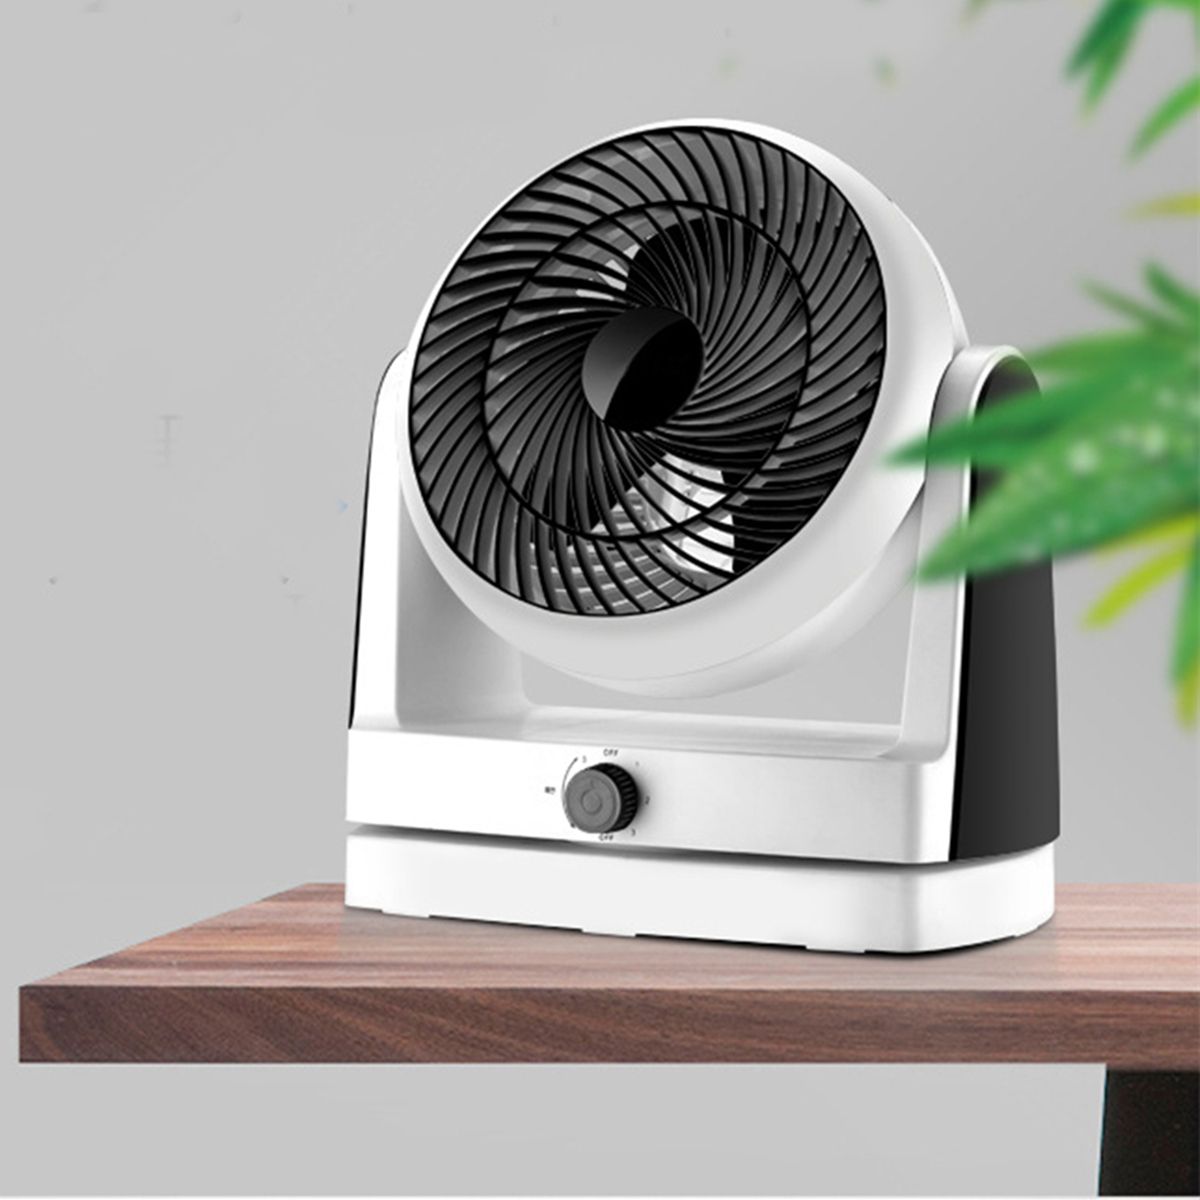 3W-220V-Quiet-Cooling-Air-Circulator-Table-Fan-Wall-Mounted-Fans-Power-Speed-For-Home-1531372